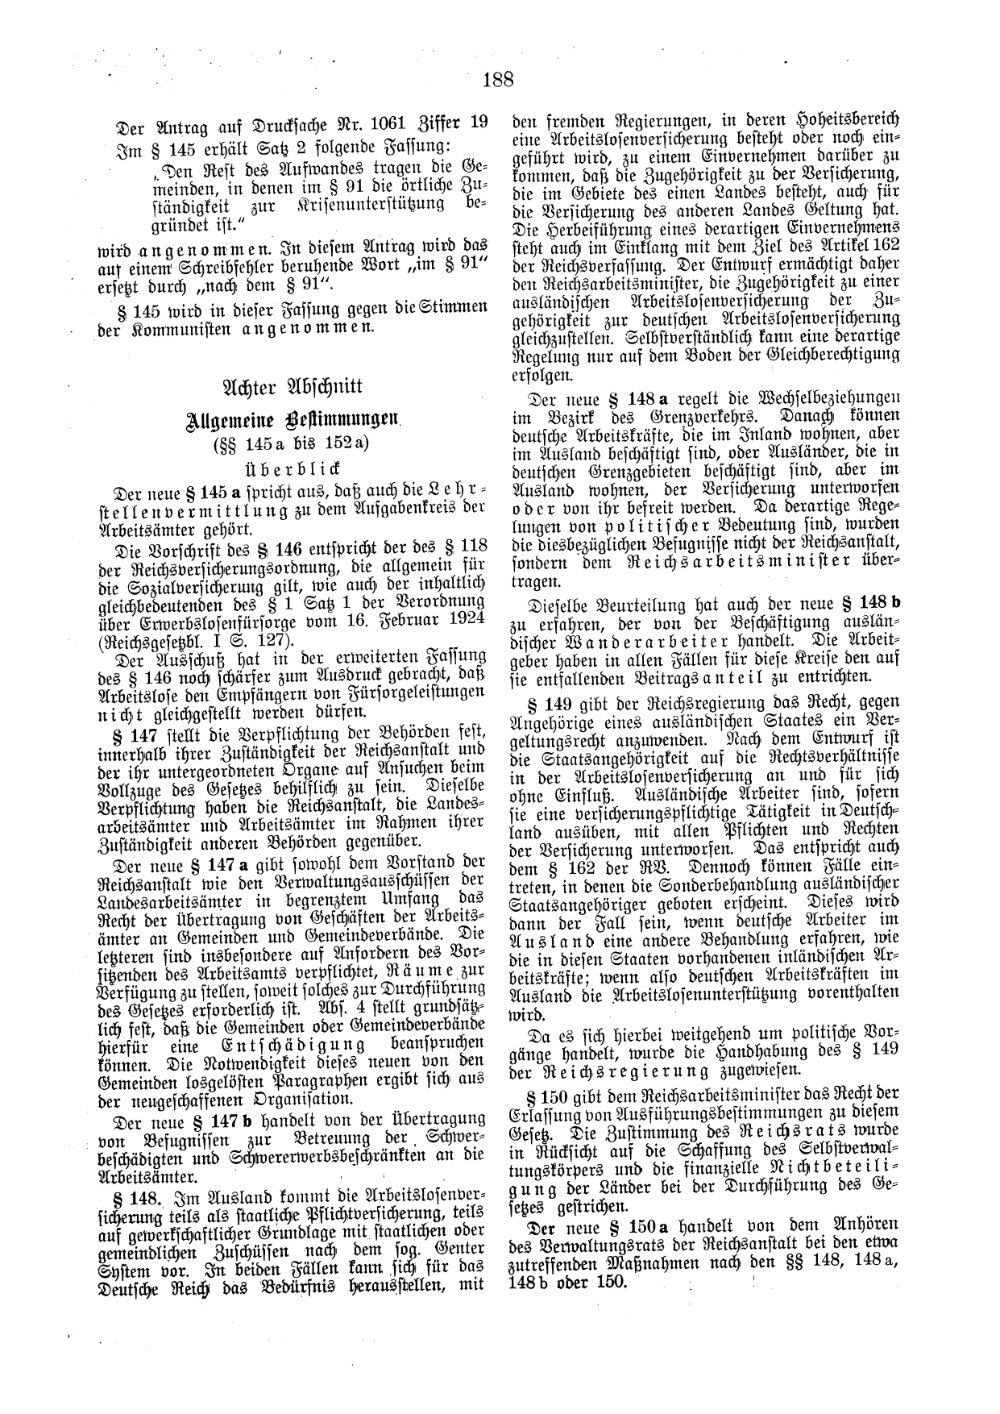 Scan of page 188